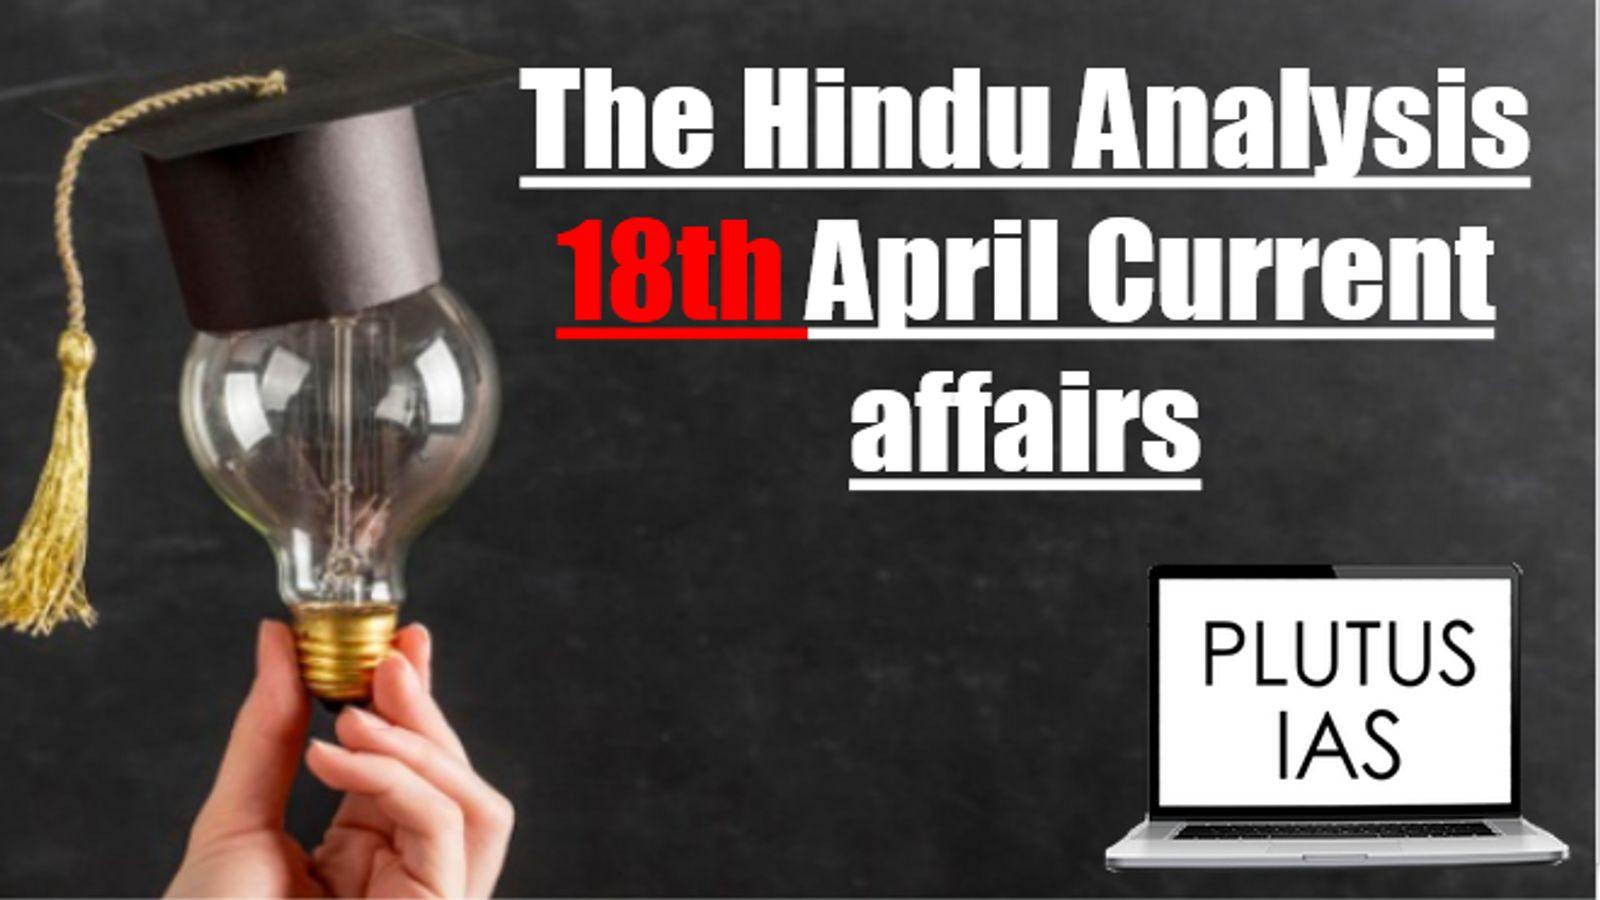 Today Current Affairs 18th April